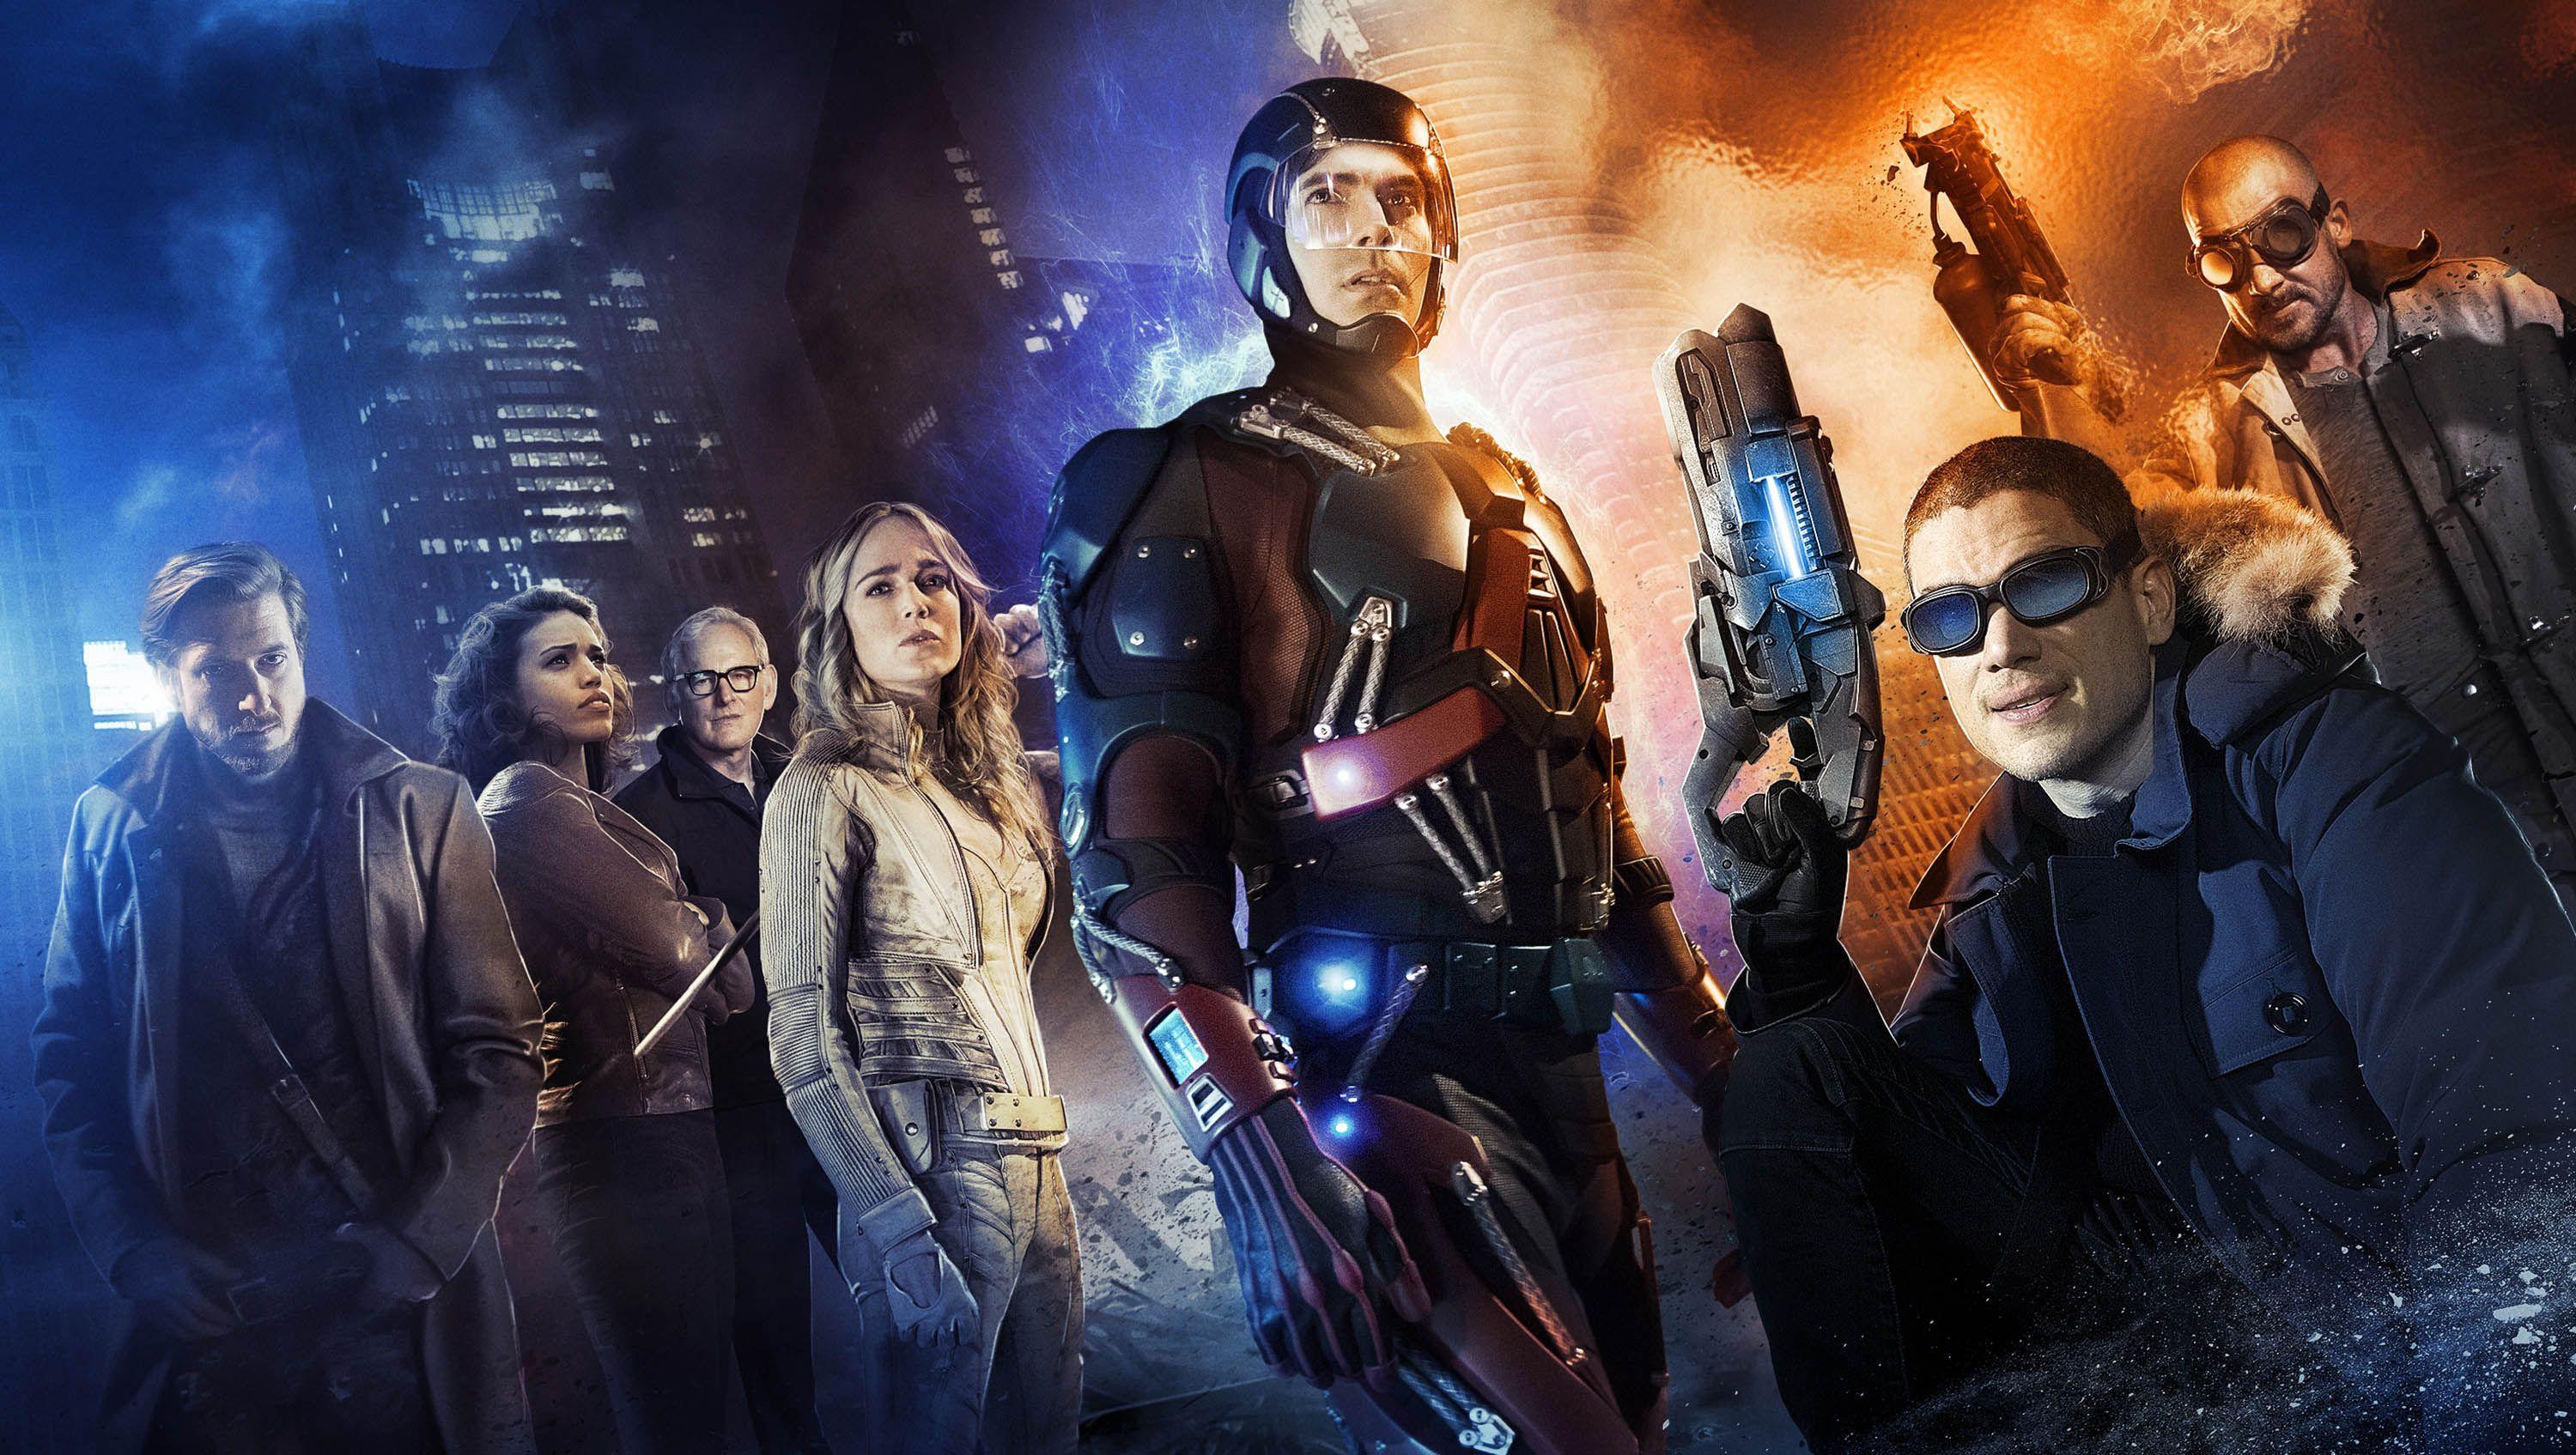 Legends Of Tomorrow Logo Wallpapers